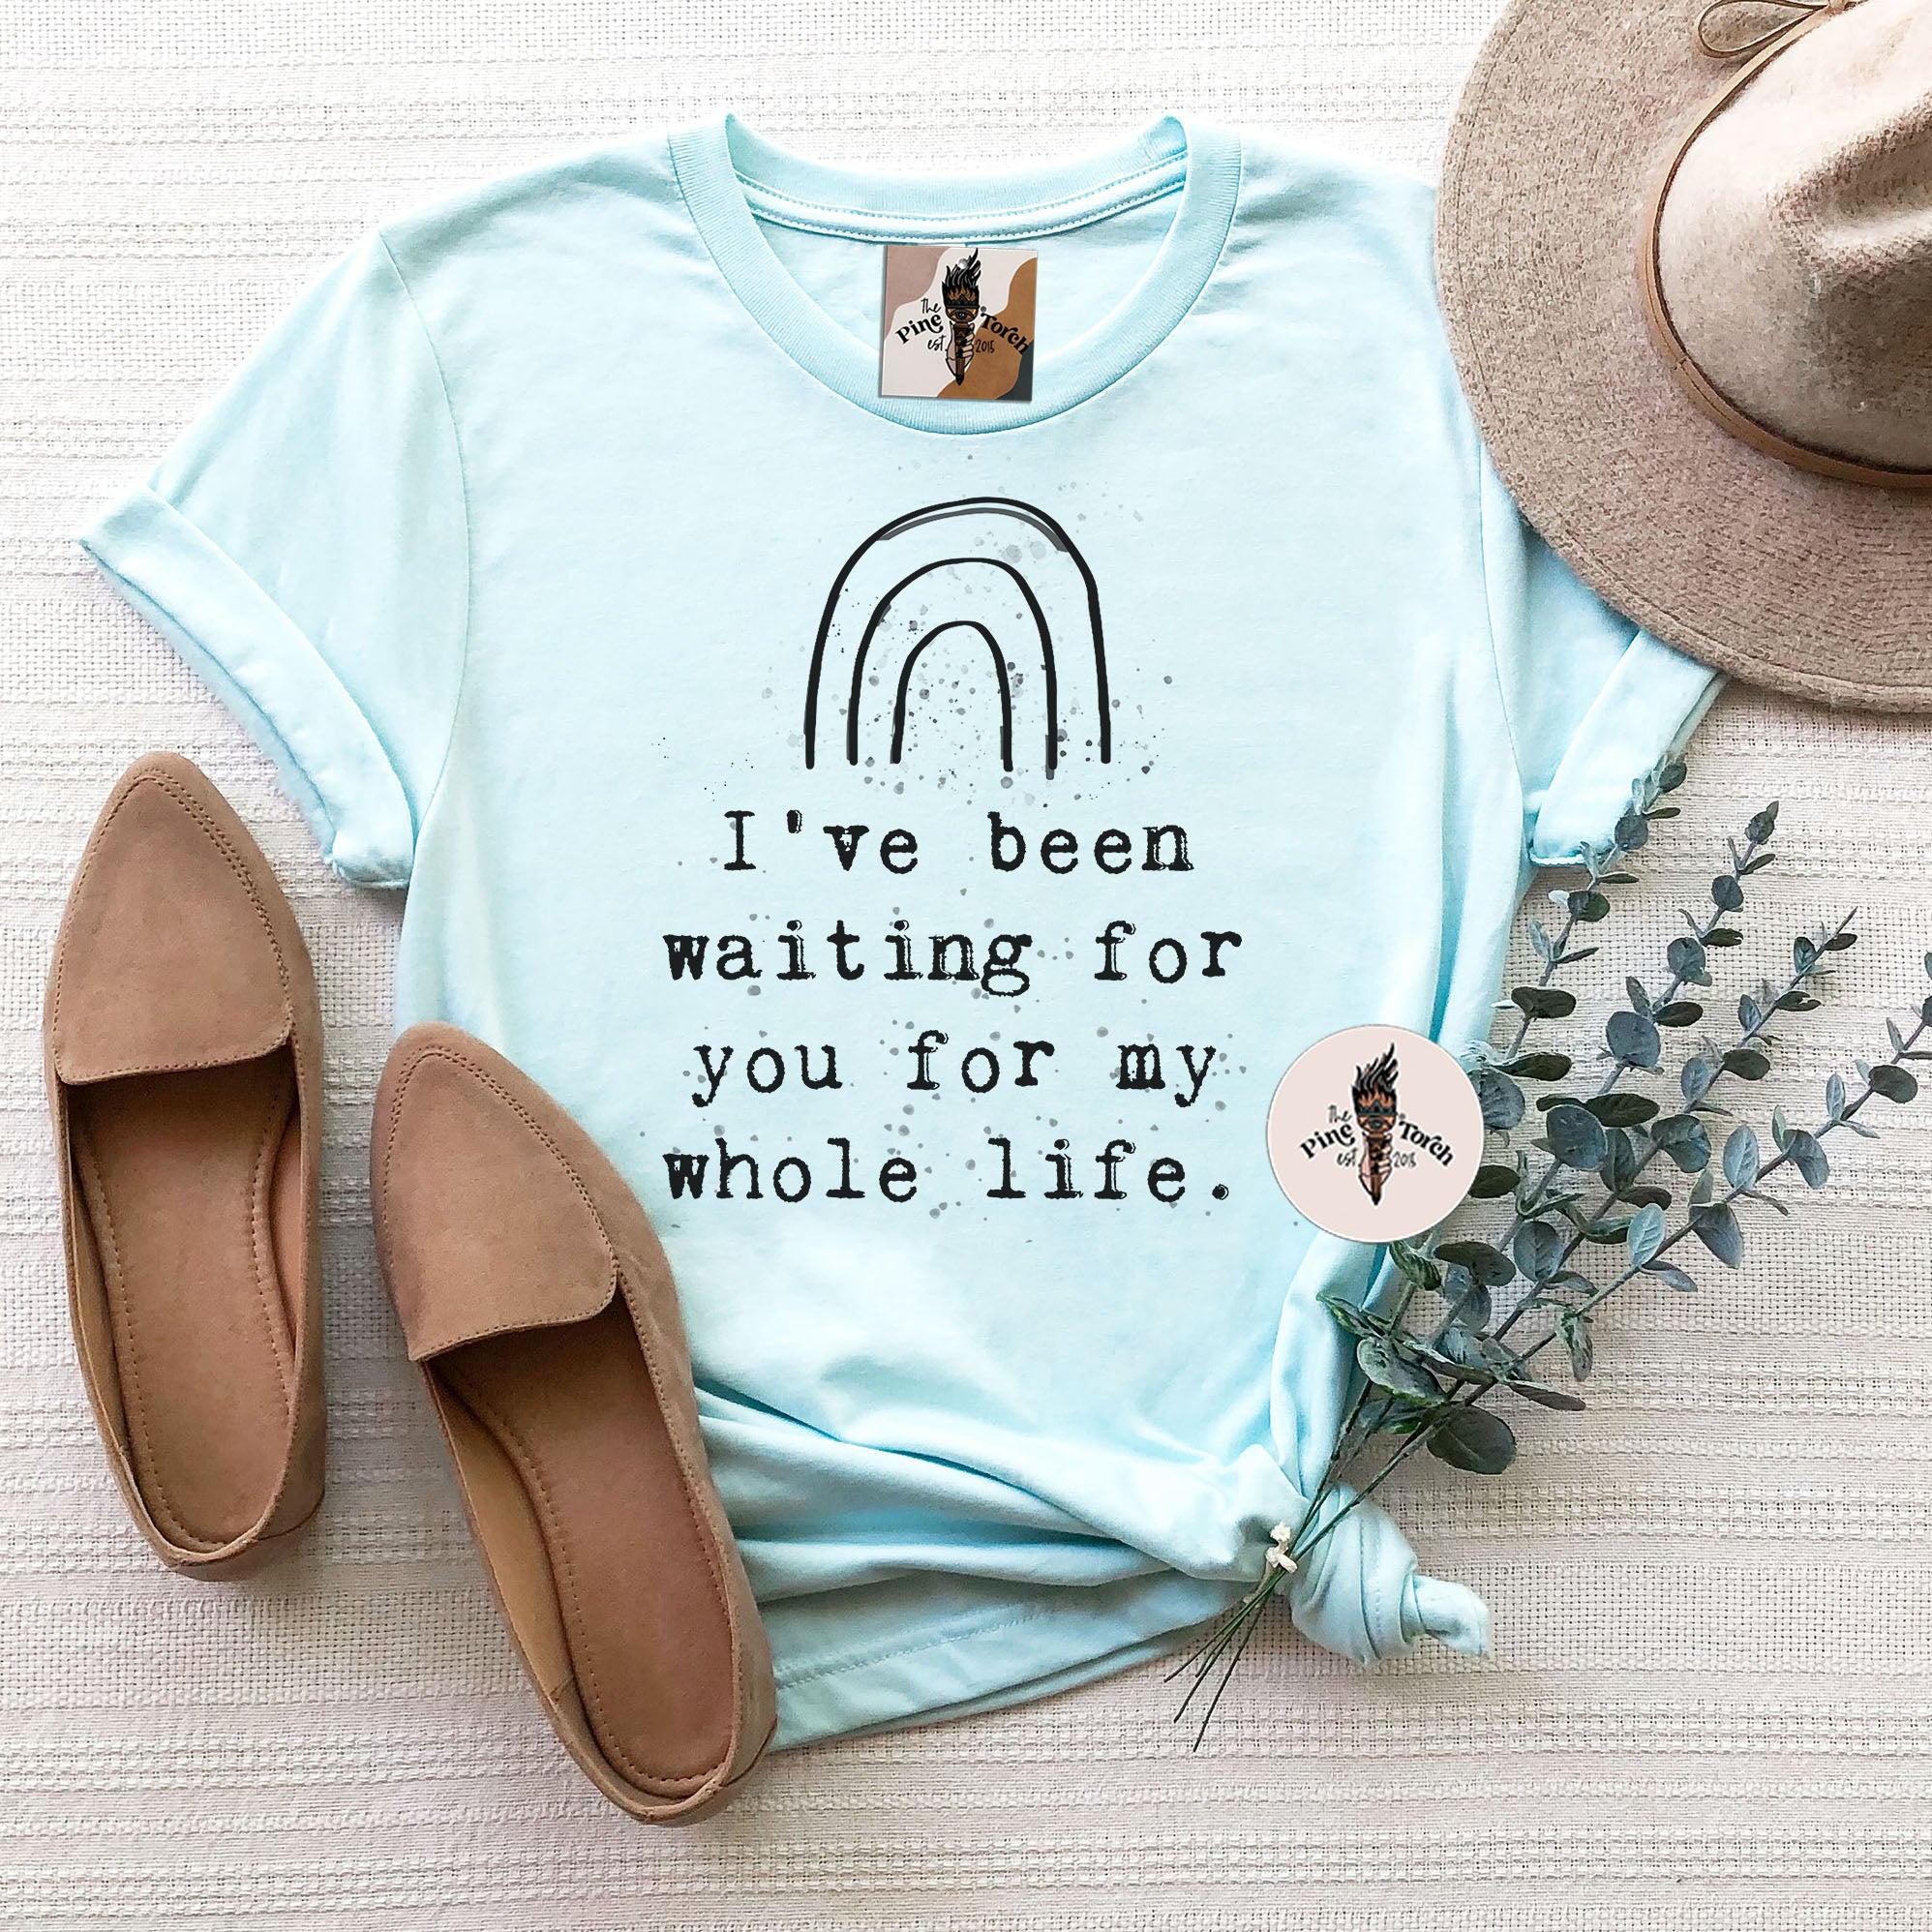 I'VE BEEN WAITING FOR YOU MY WHOLE LIFE // UNISEX TEE